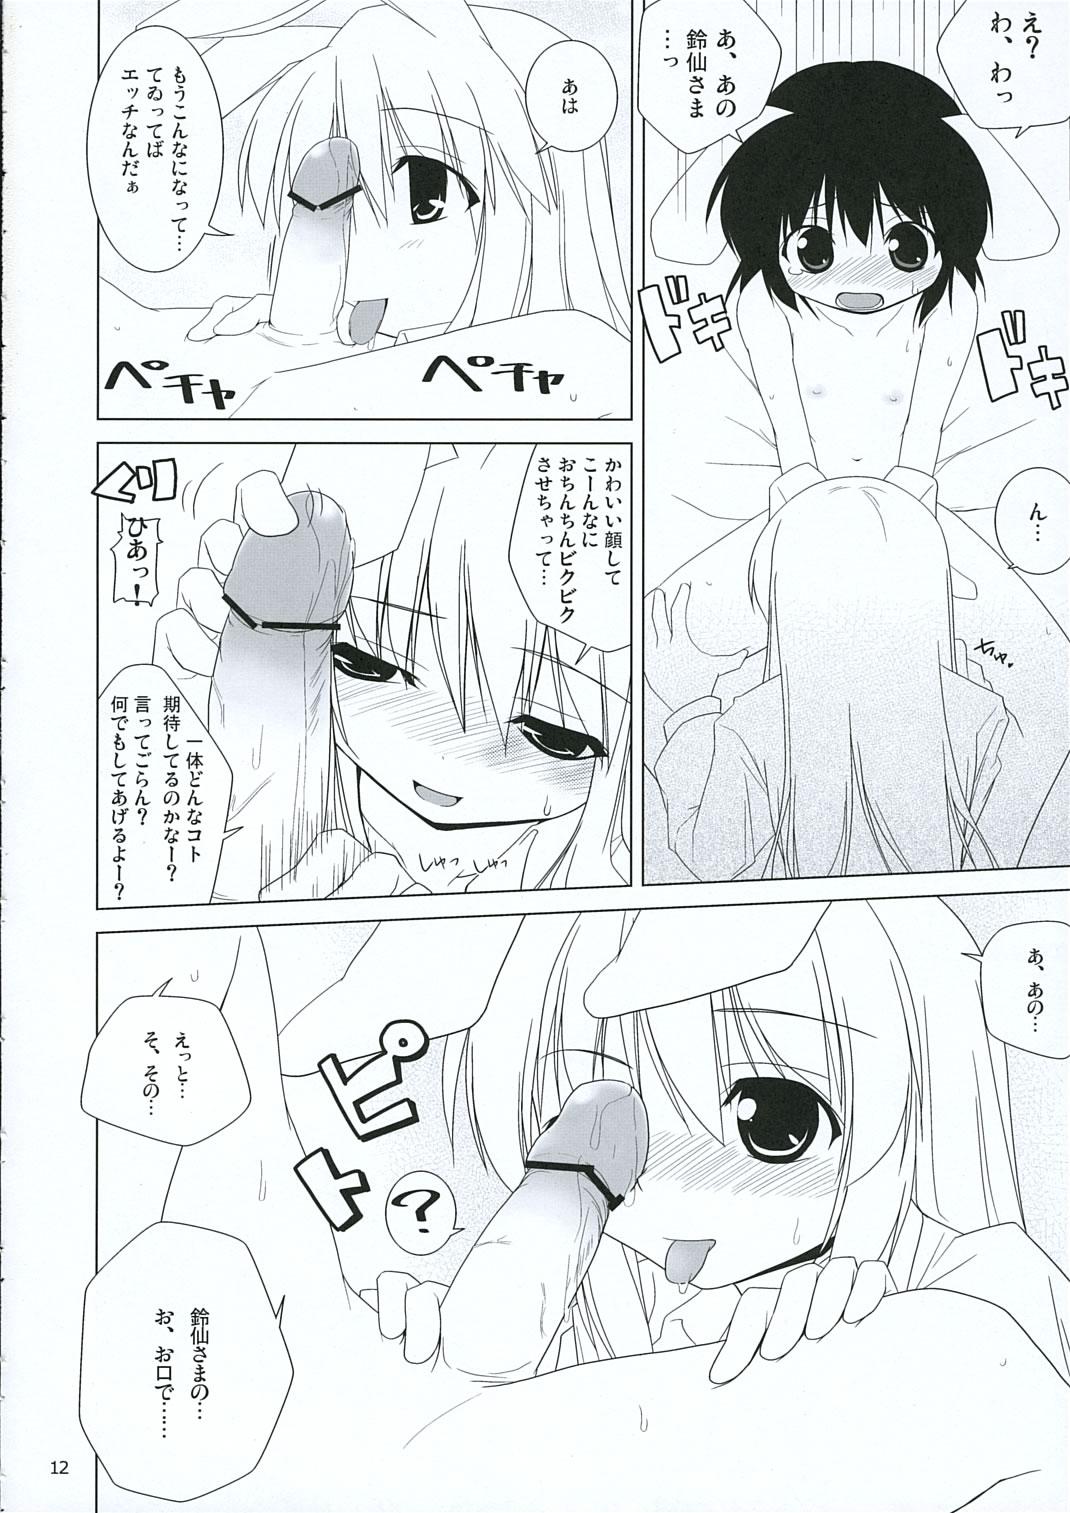 Gag INABA BOX 3 - Touhou project Shemale Porn - Page 11